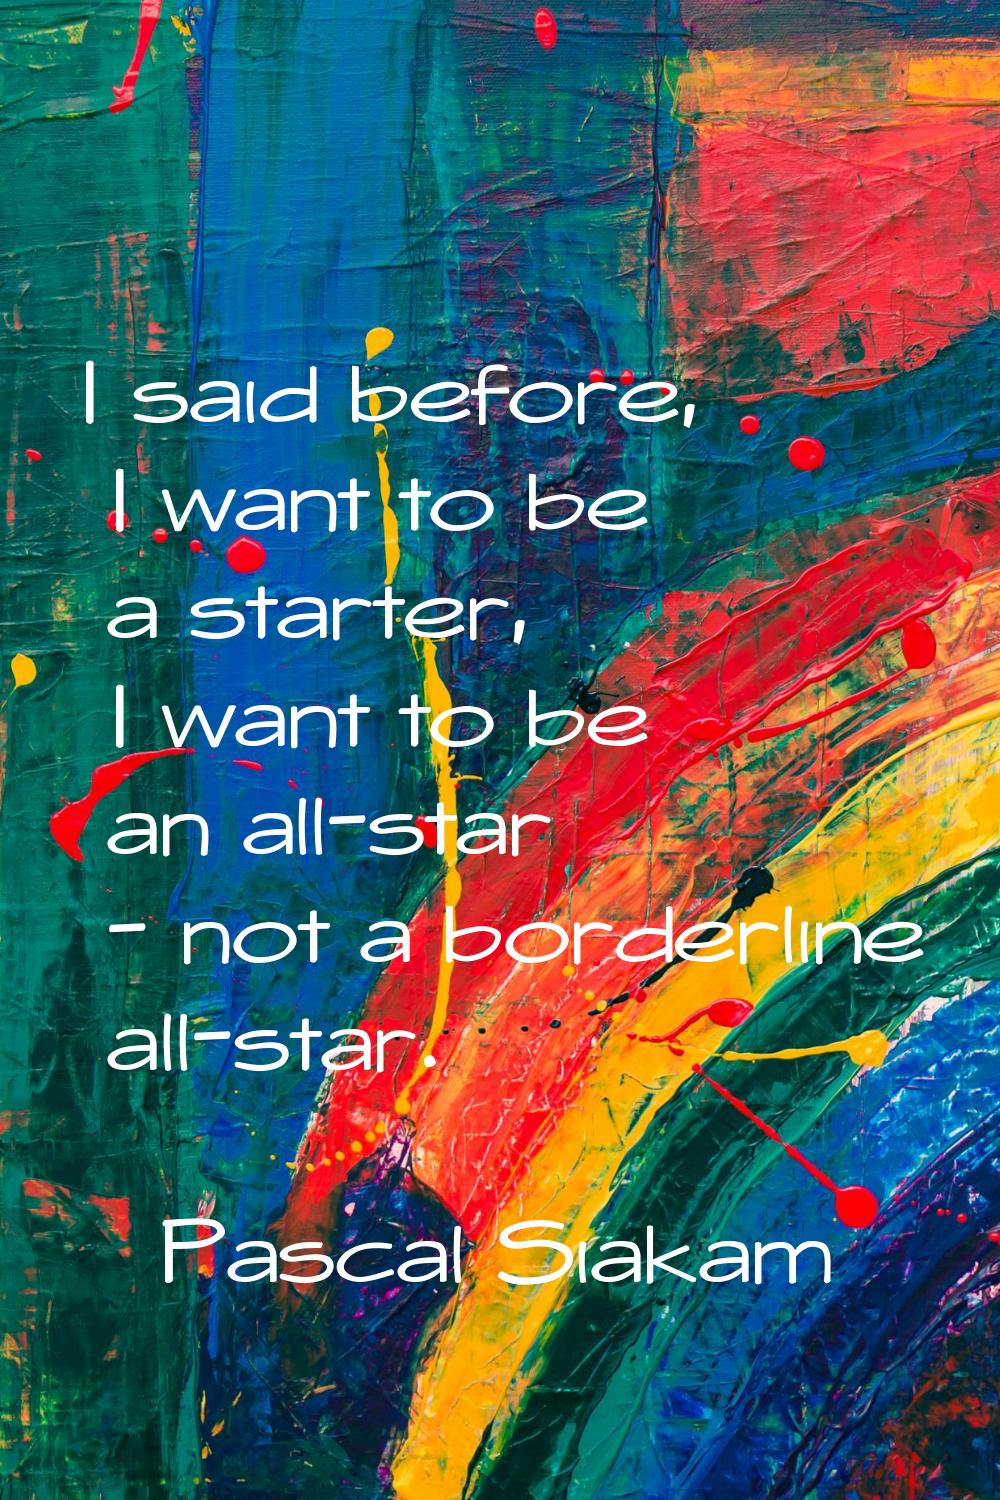 I said before, I want to be a starter, I want to be an all-star - not a borderline all-star.